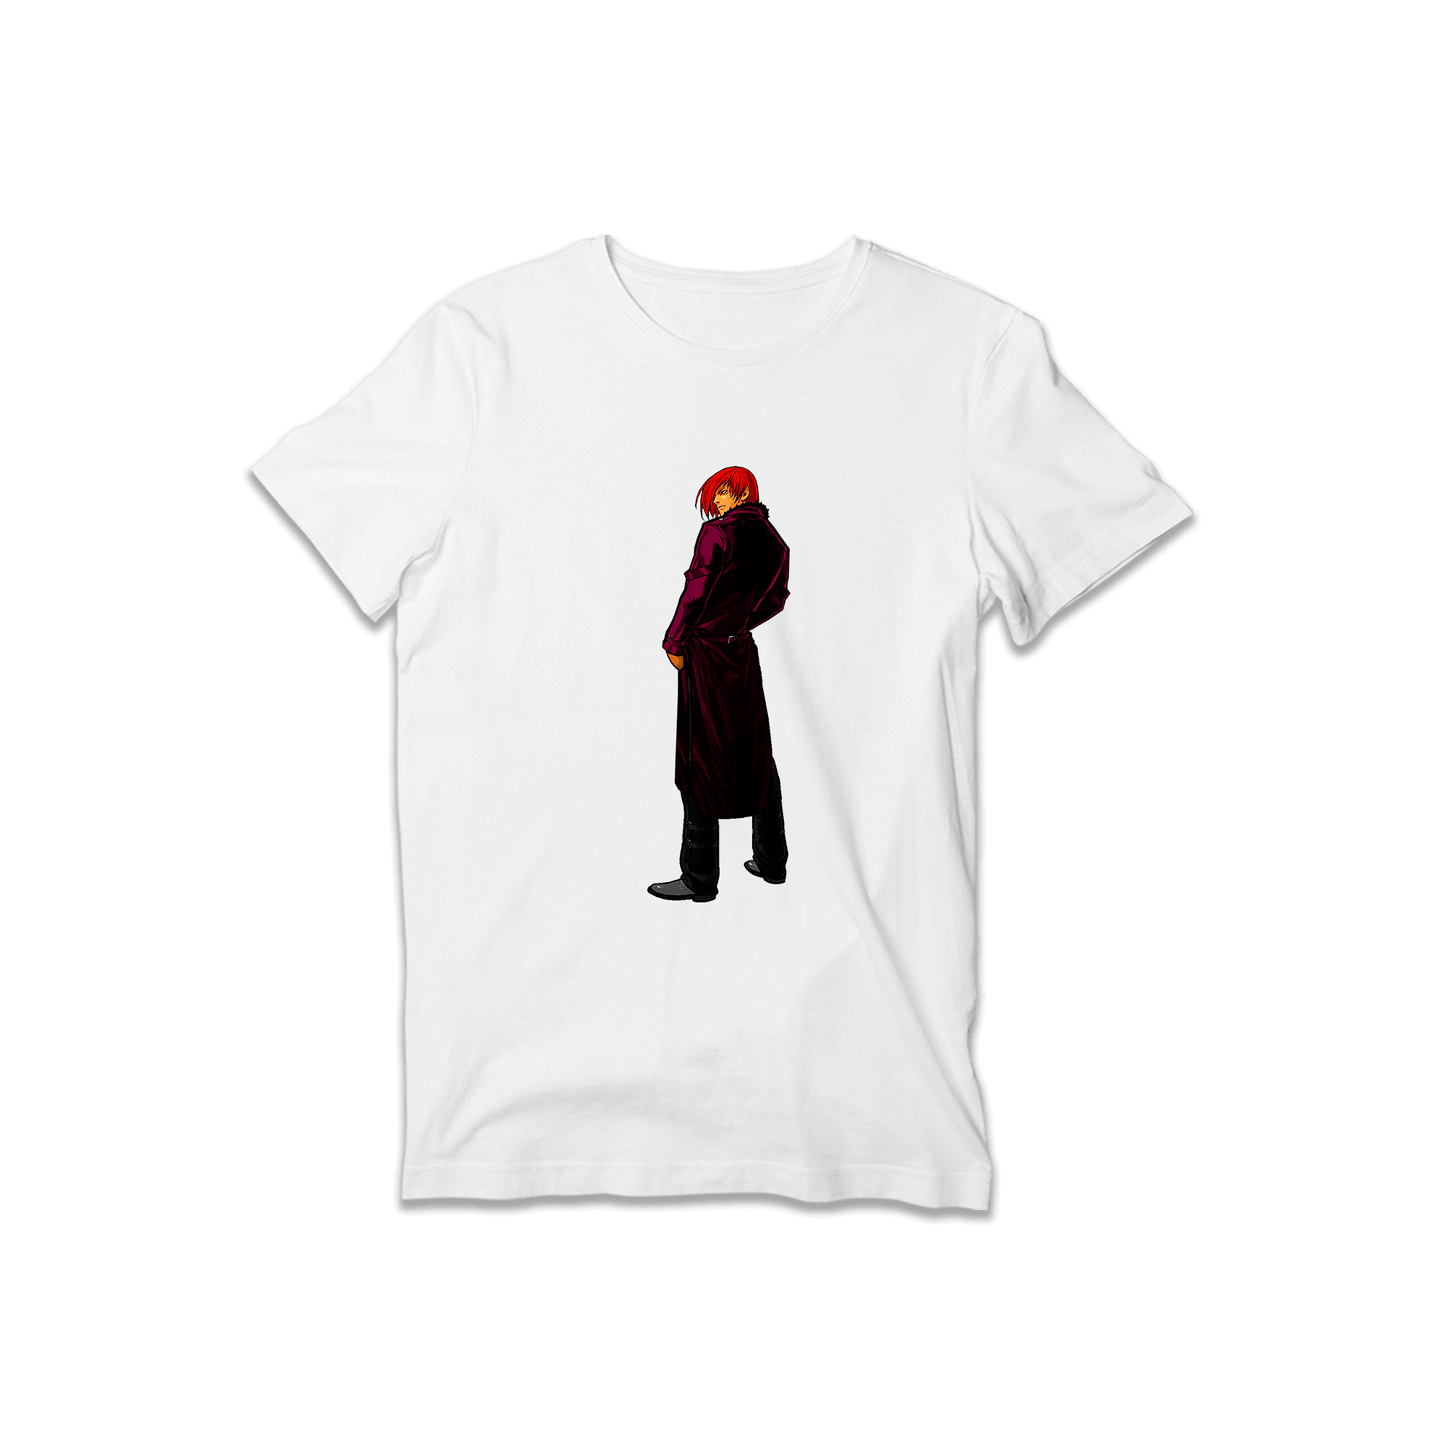 Iori Yag T-Shirt - The King of Fighters